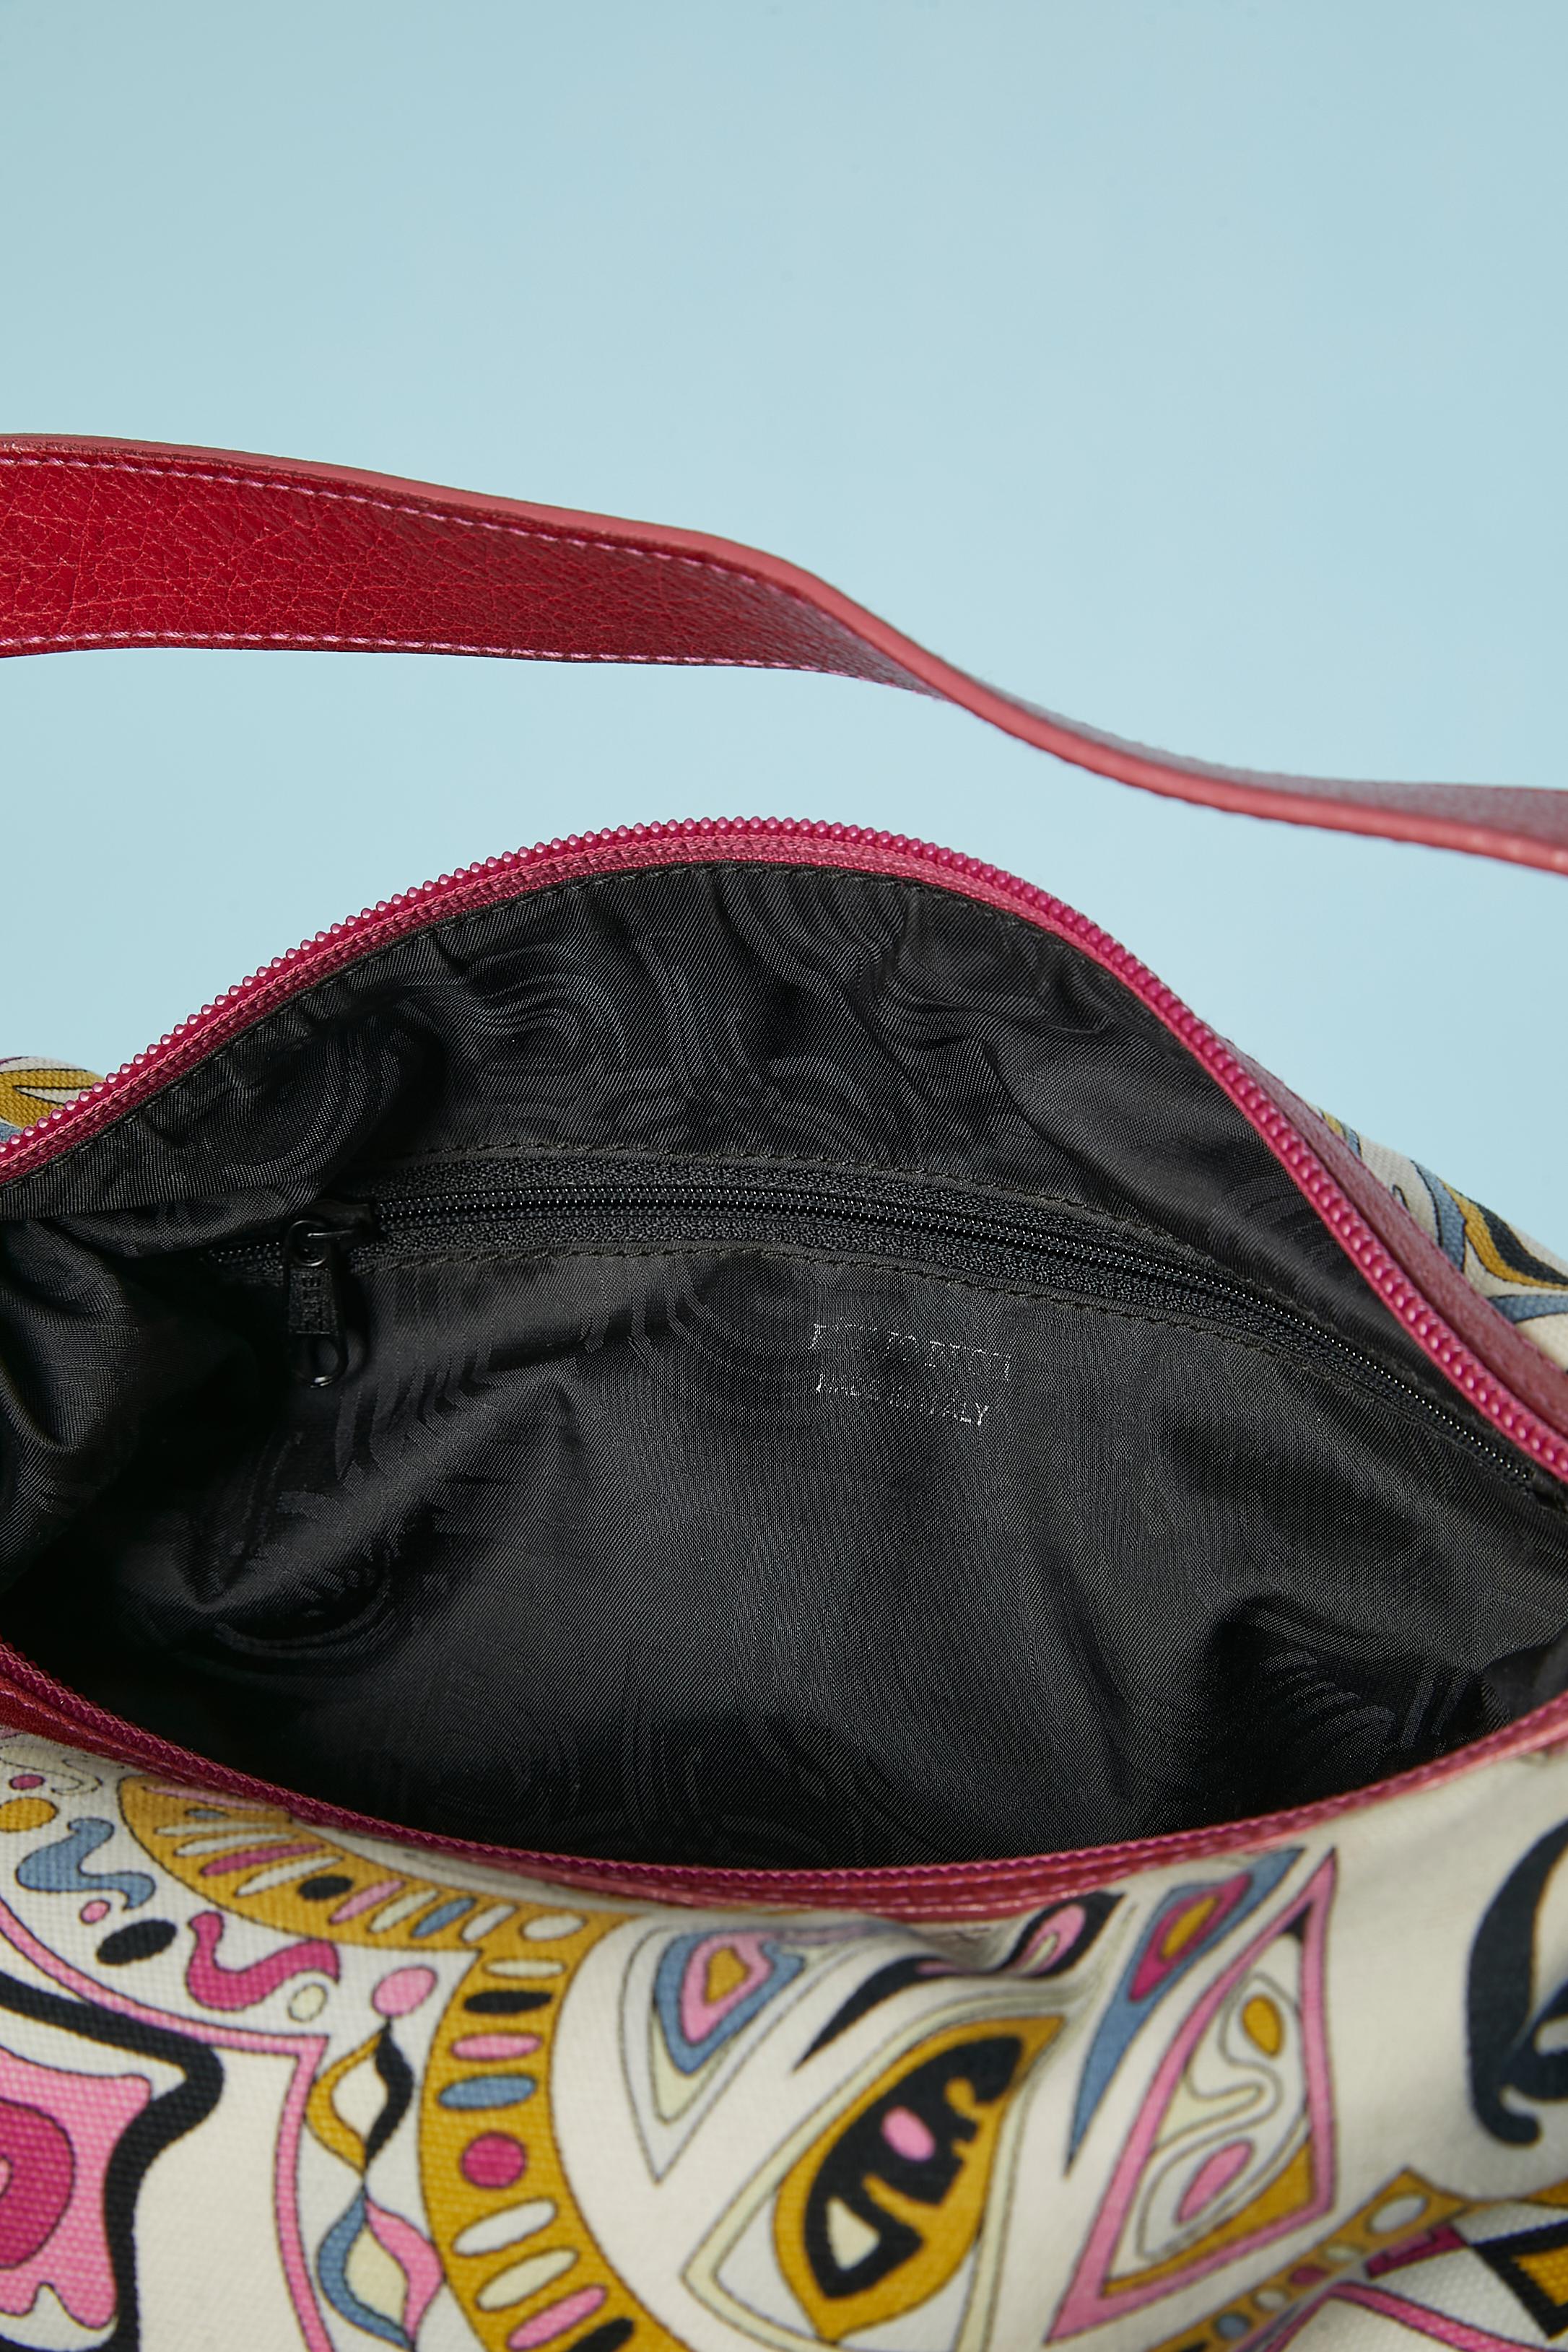 Printed canevas and red leather handbag Emilio PUCCI  For Sale 3